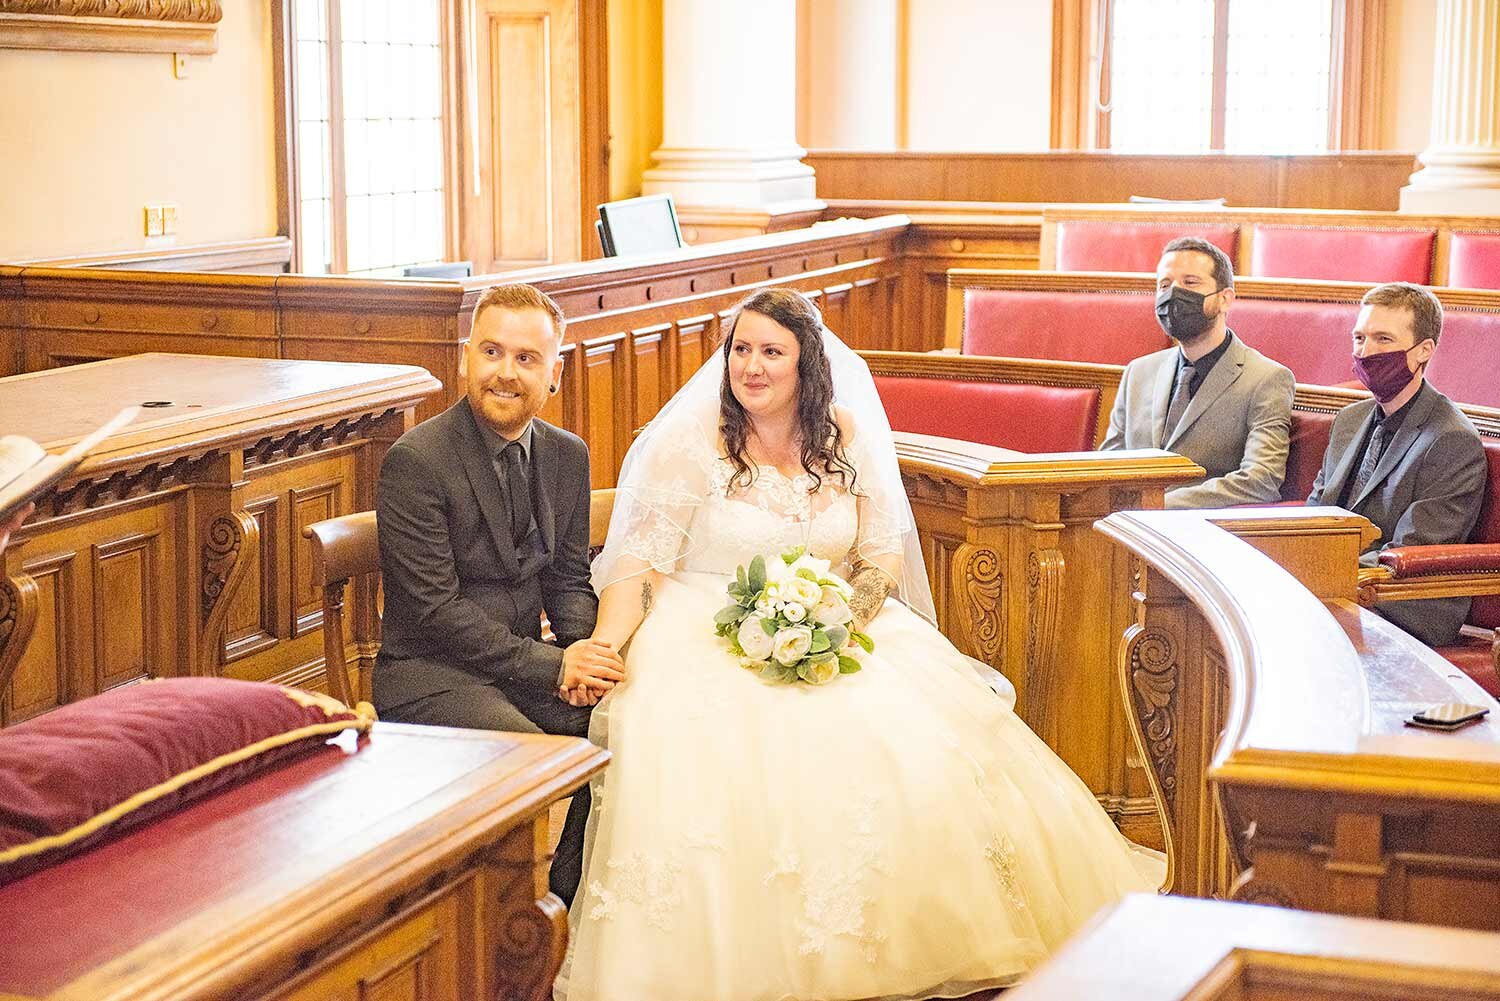 Bride and groom ceremony at brighton town hall